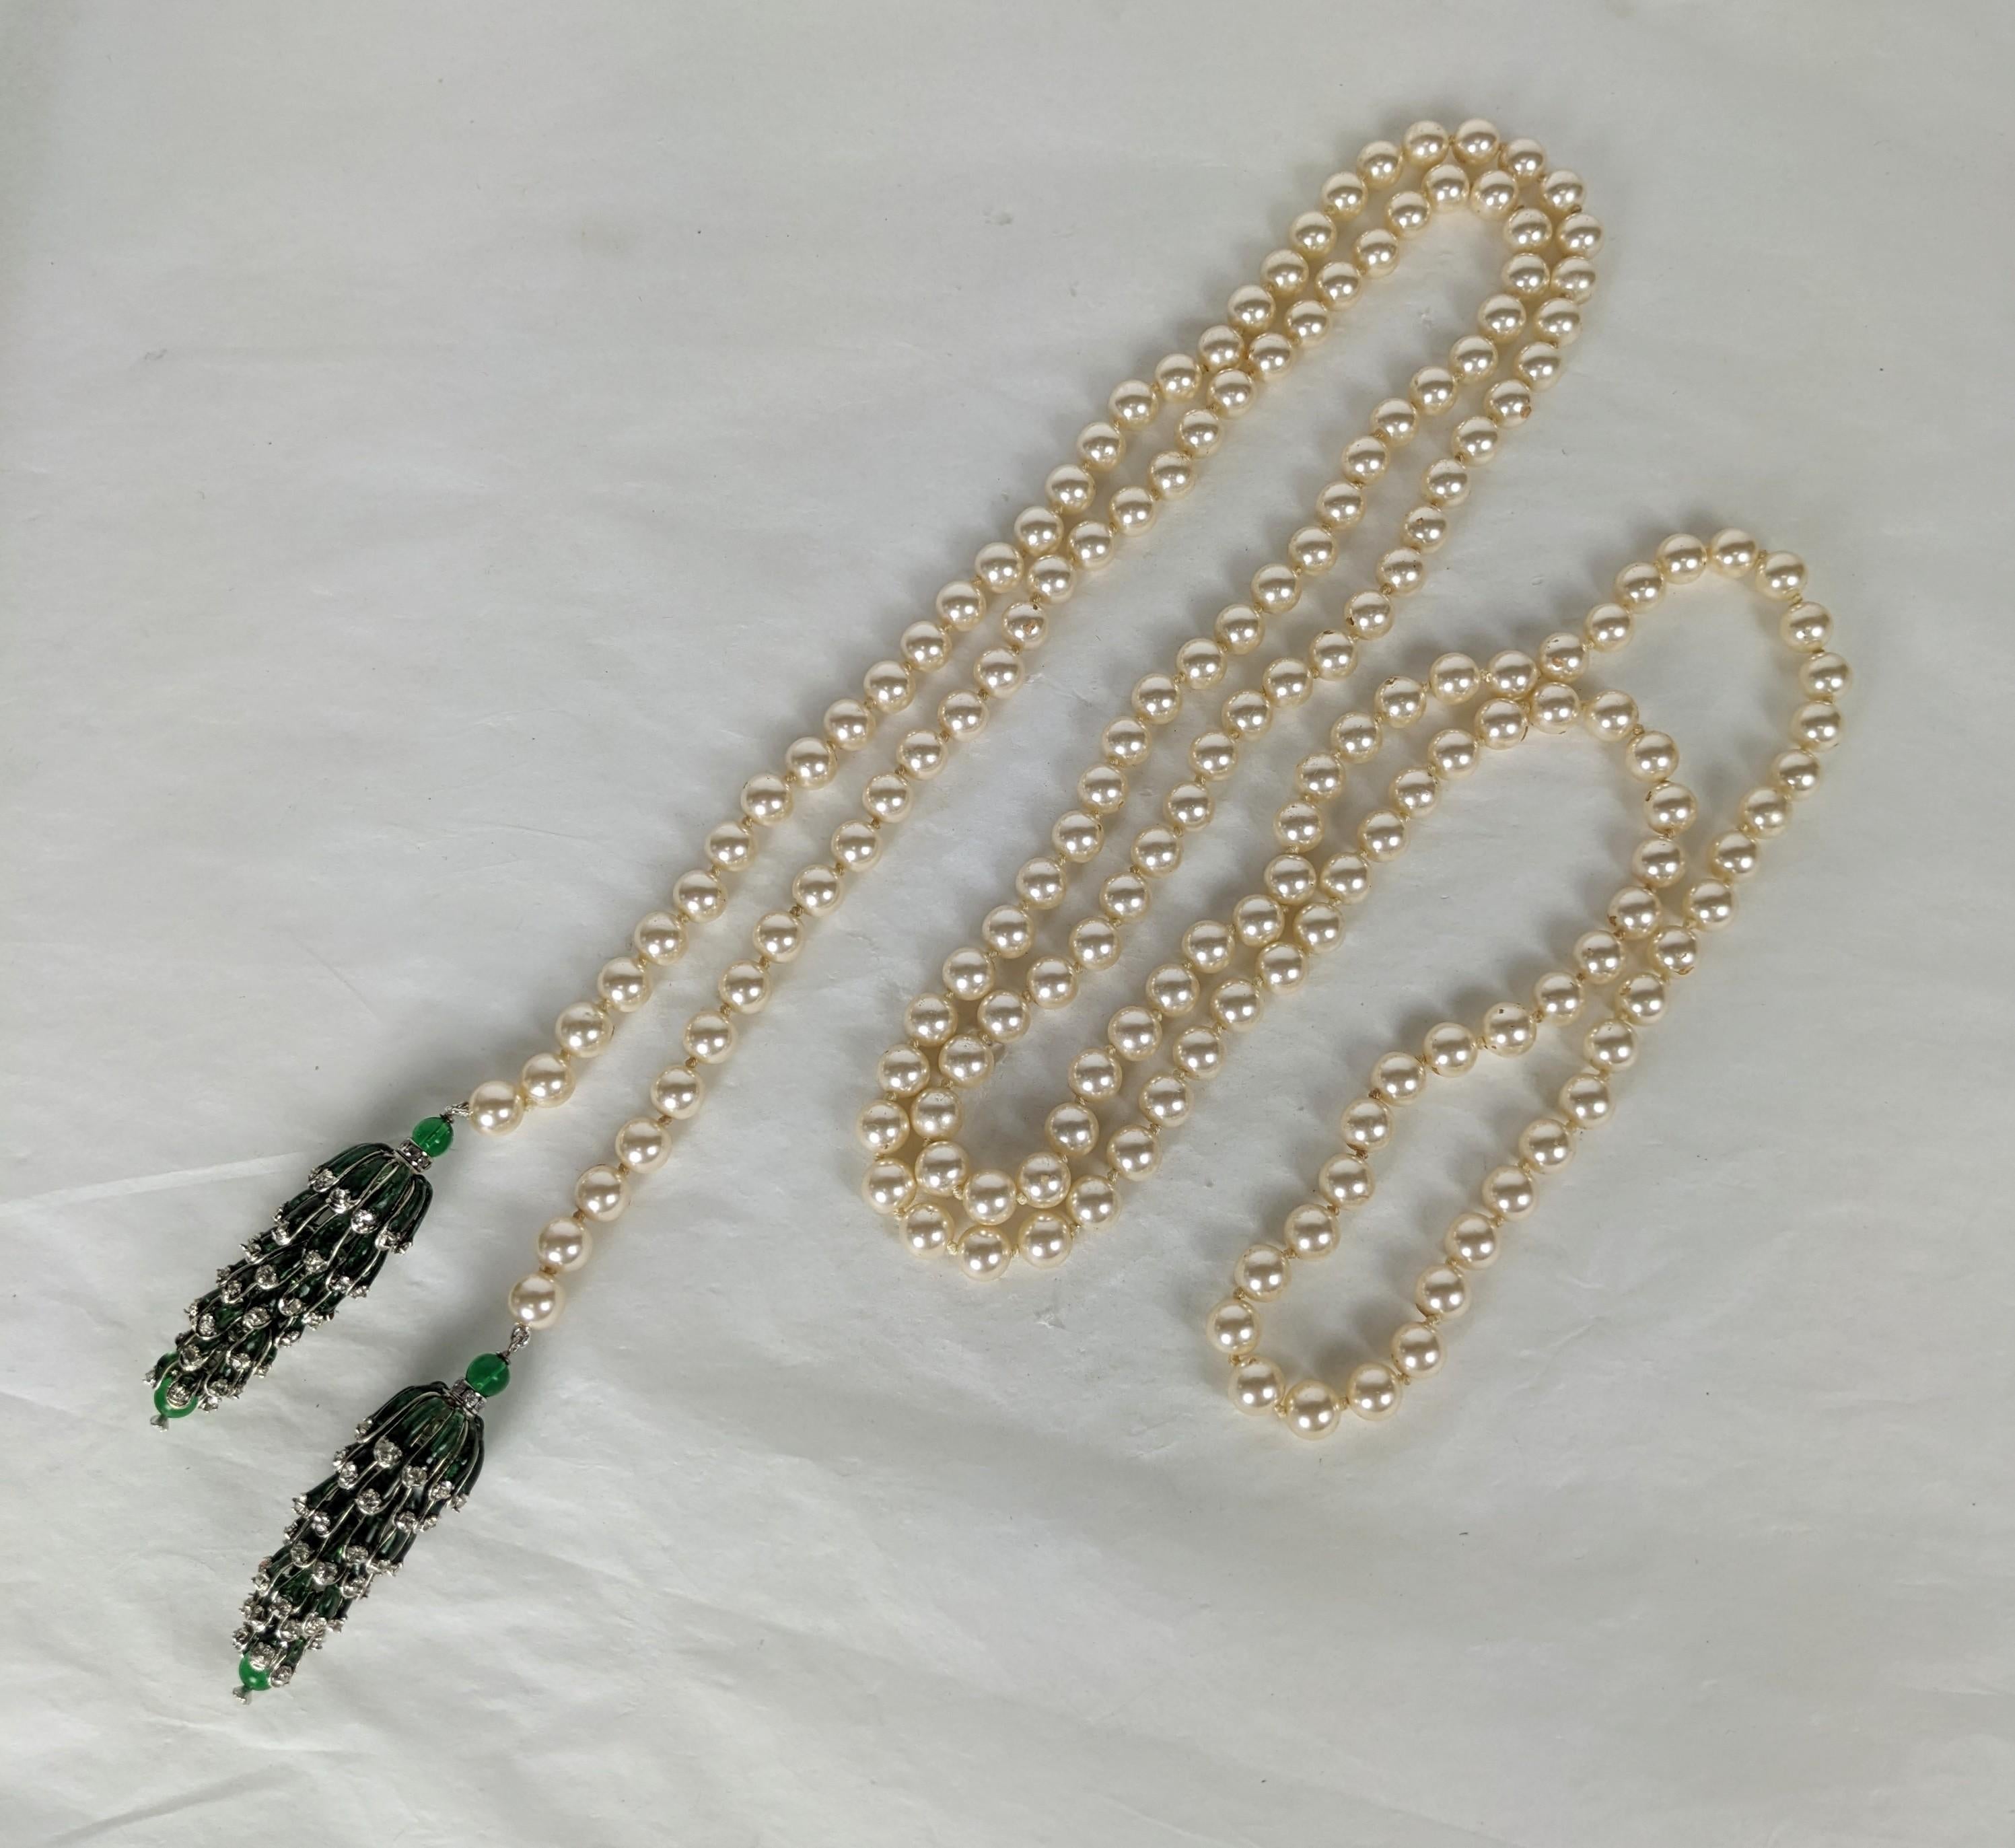 Rare Coco Chanel sautoir necklace 1950's by Maison Gripoix. The Art Deco inspired long necklace is composed of imitation glass hand knotted pearls with a pair of fine emerald poured glass enamel articulated pendants, decorated with minute prong set